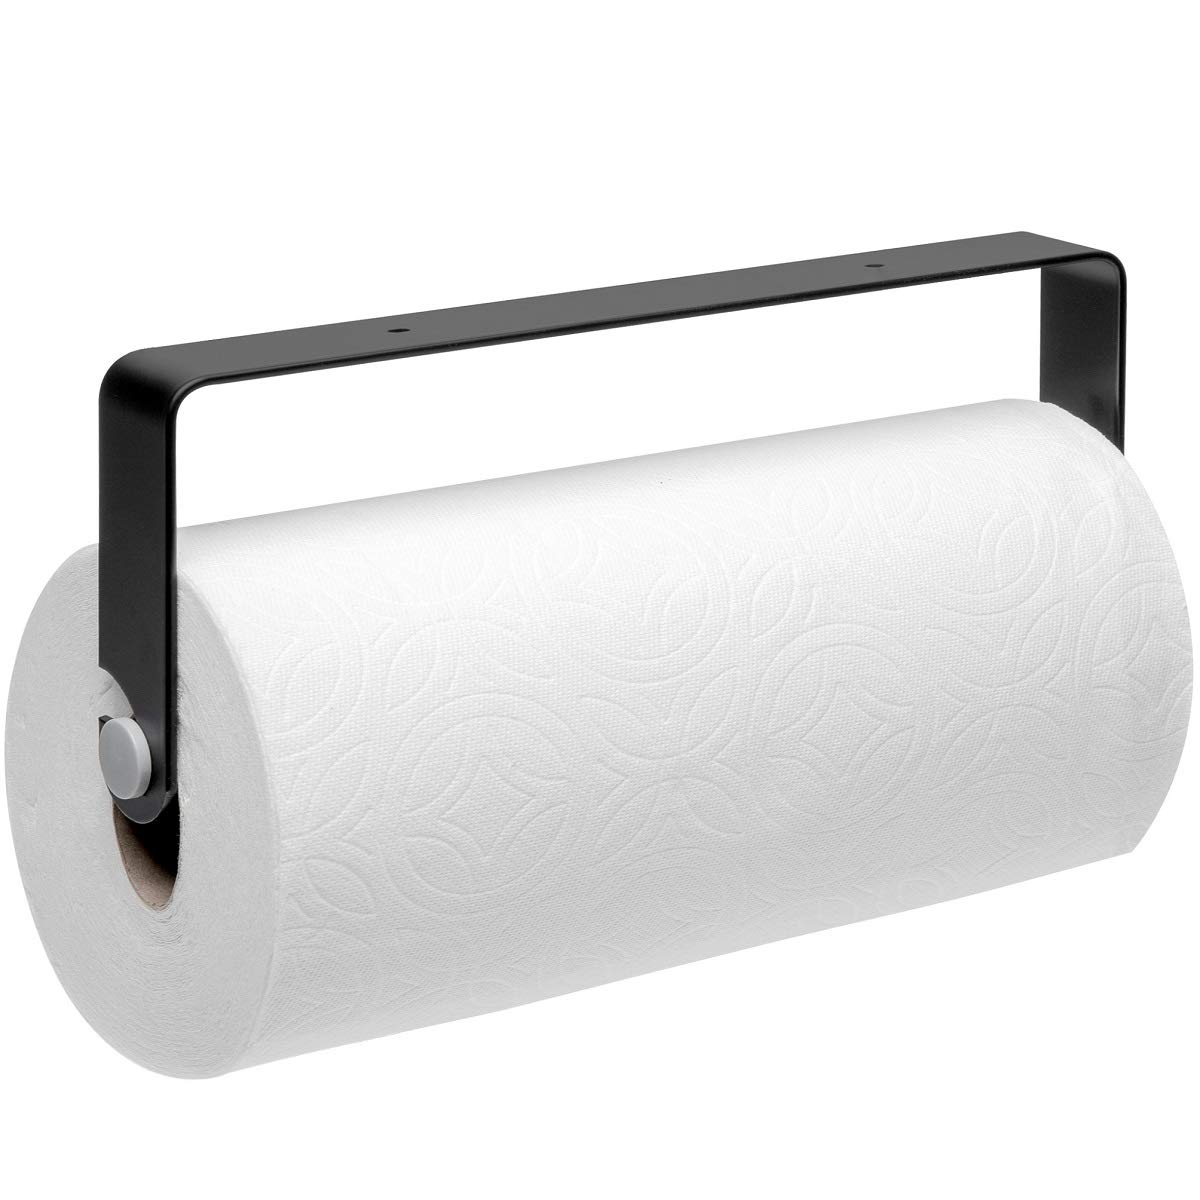 TeenGo Paper Towel Holder Under Cabinet, No Drilling & Wall Mount with 2 Self Adhesives for Kitchen